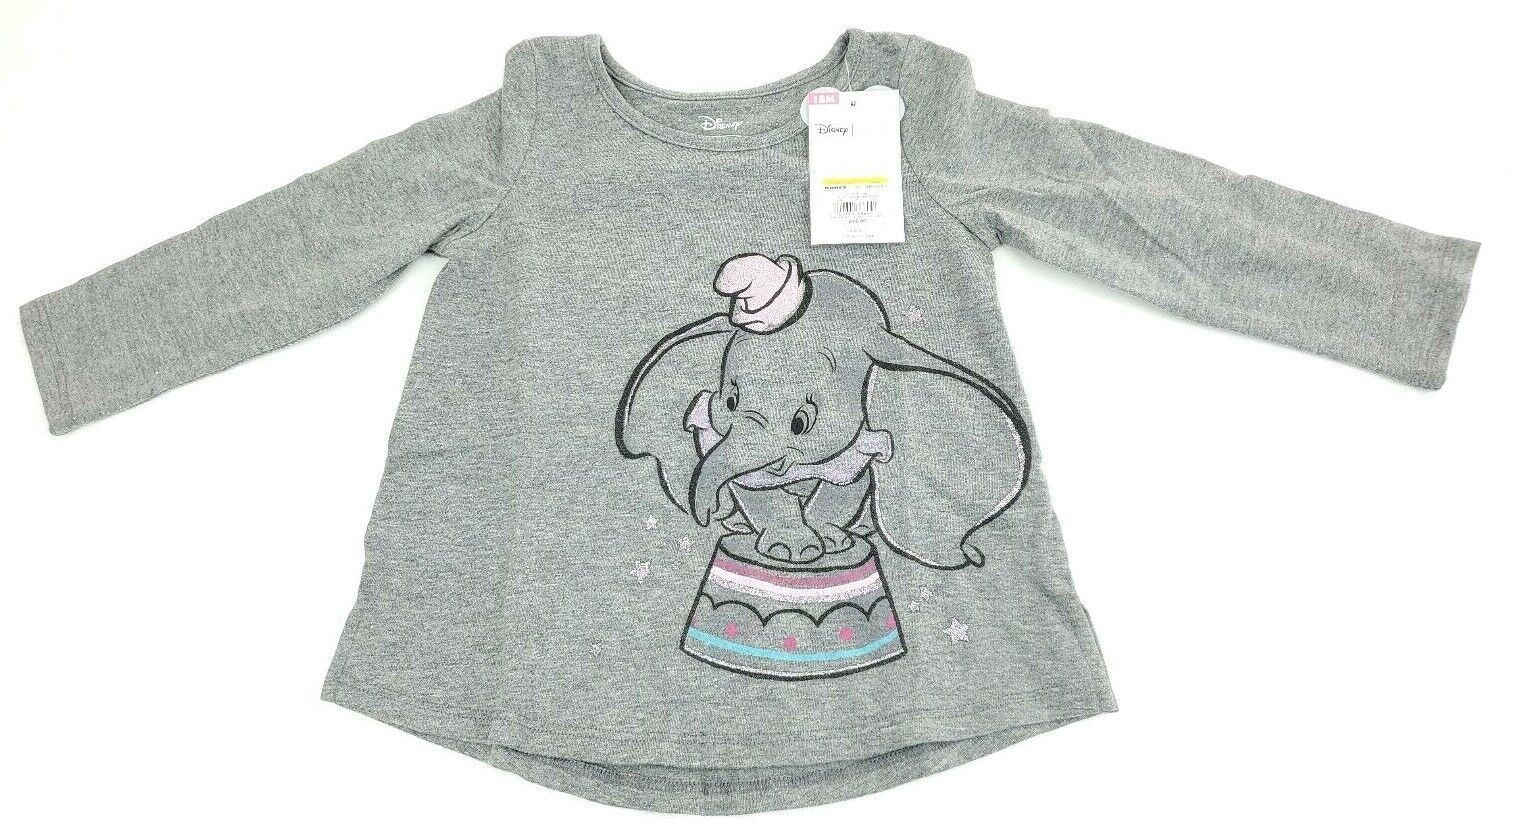 Disney Jumping Beans Top Long Sleeve Gray with Glitter Dumbo Size 18 M - $5.60